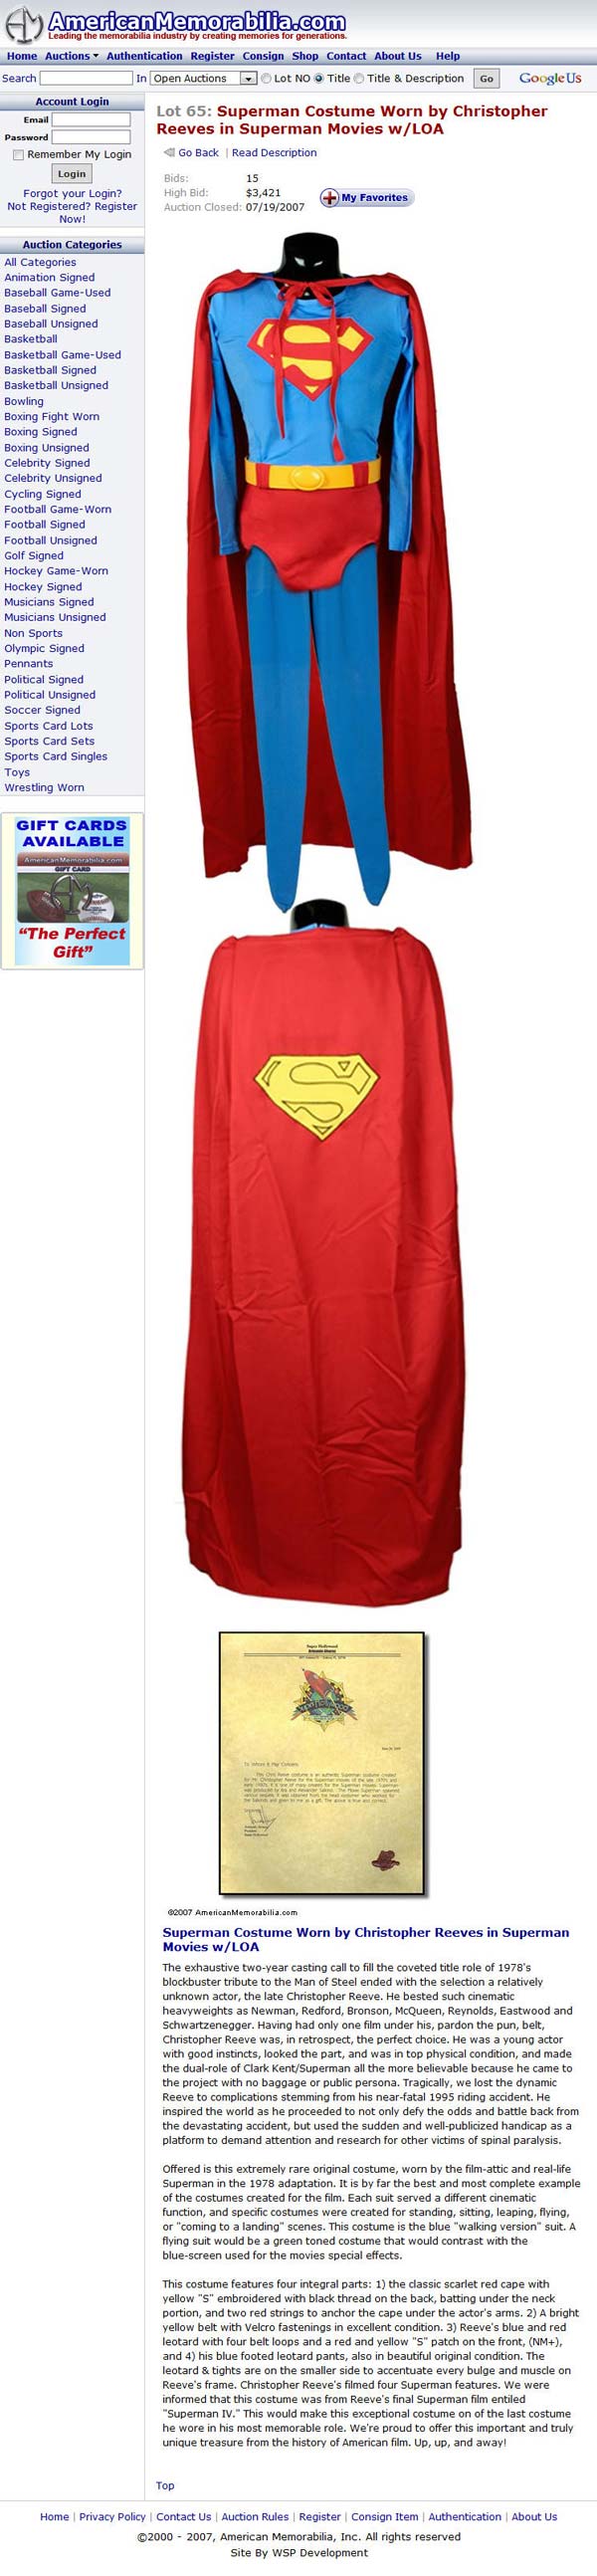 Original Superman Costume Auction House Reference Archive Part 3 ...